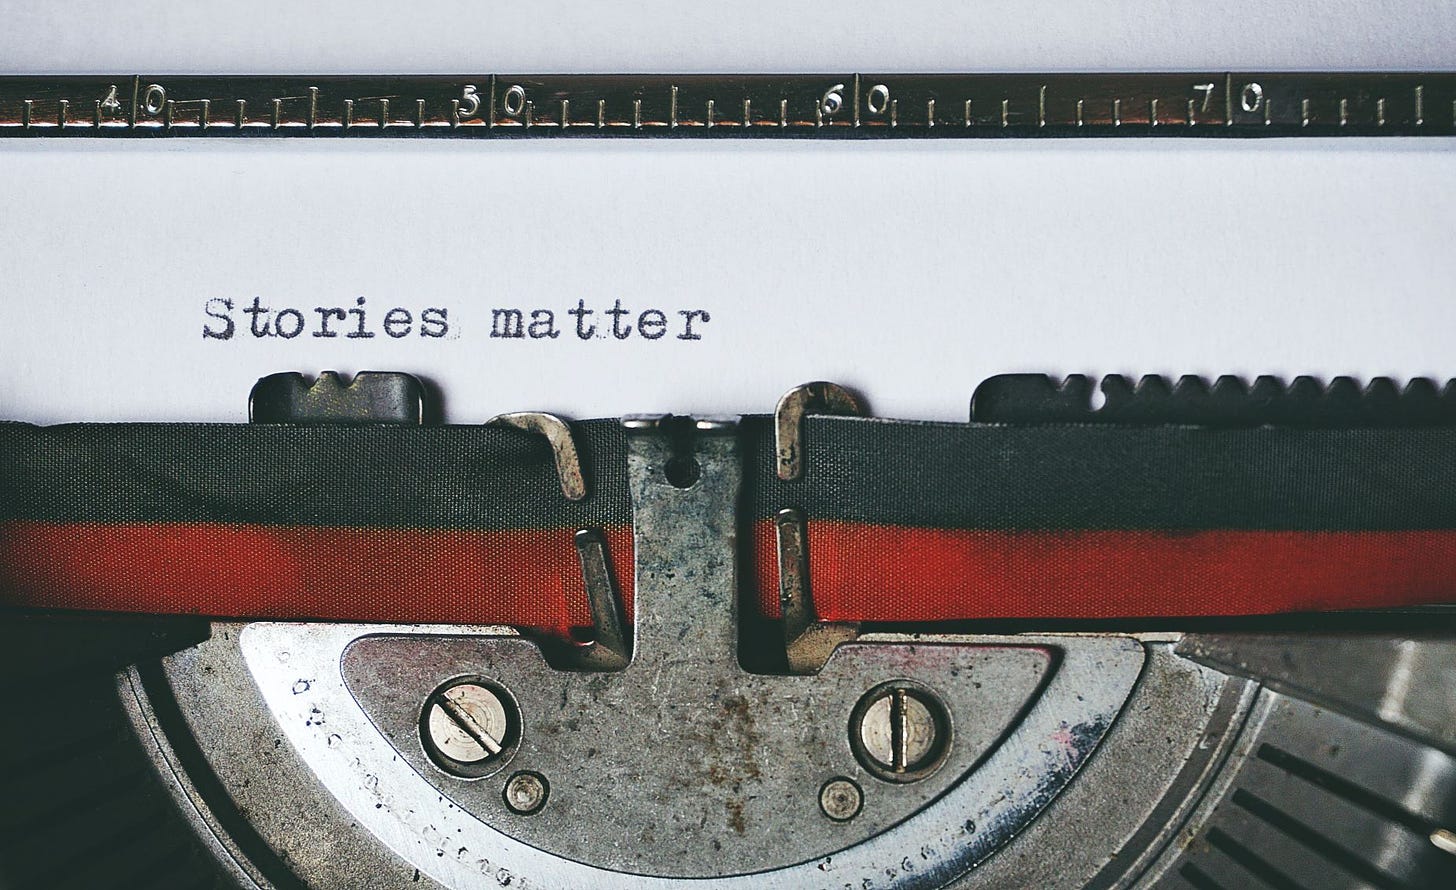 typed words "stories matter"